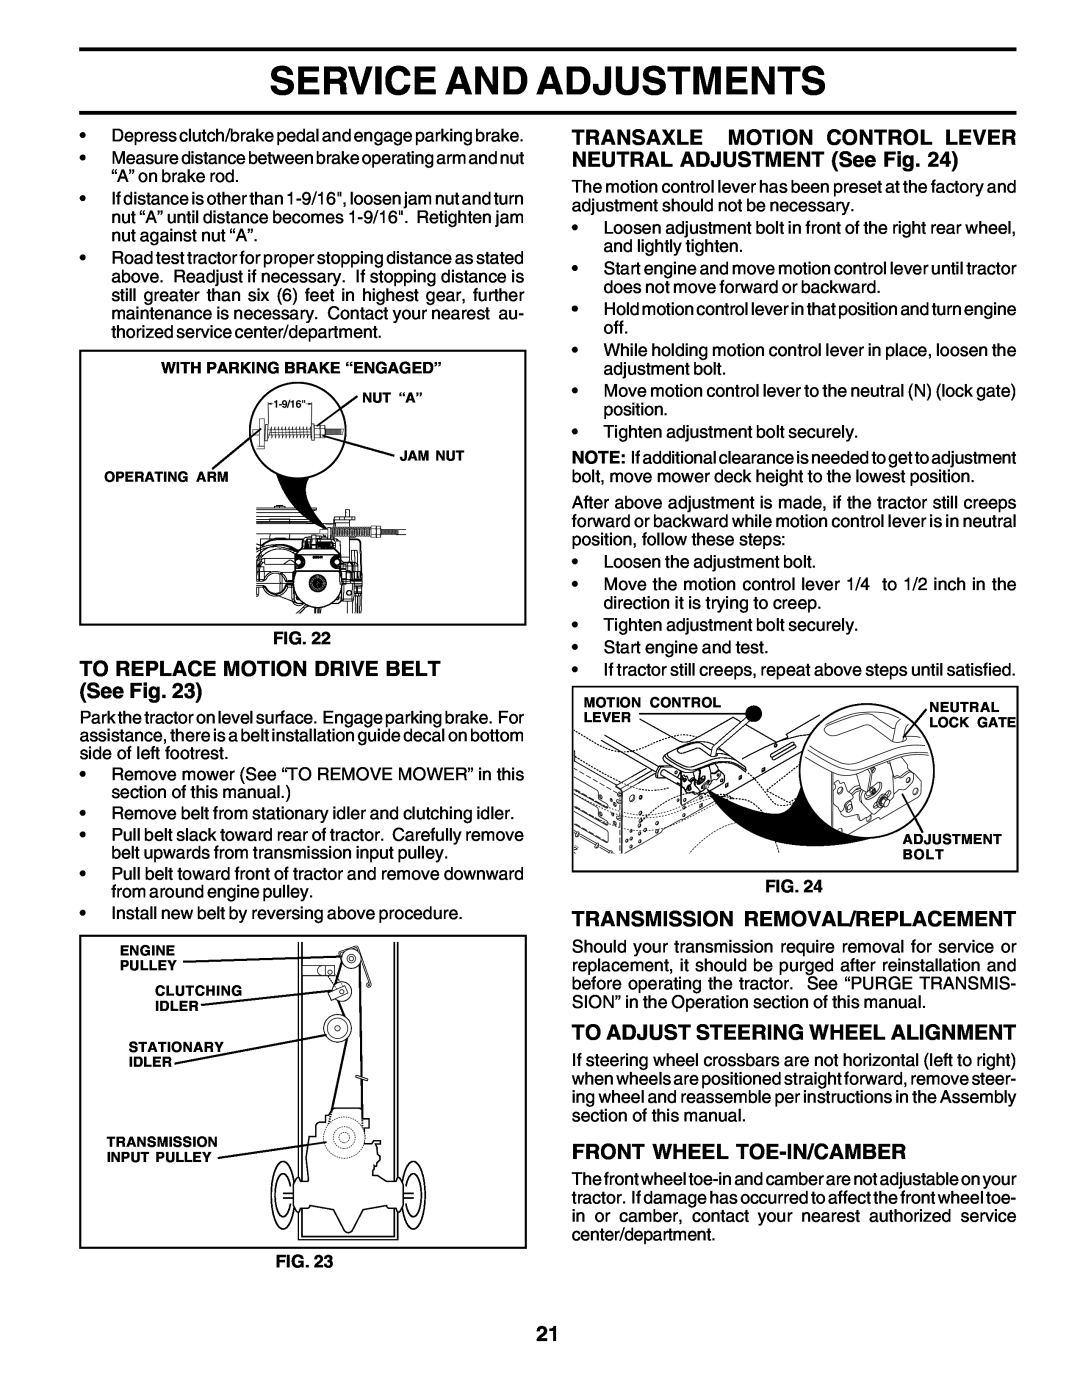 Weed Eater 178704 manual Service And Adjustments, TO REPLACE MOTION DRIVE BELT See Fig, Transmission Removal/Replacement 